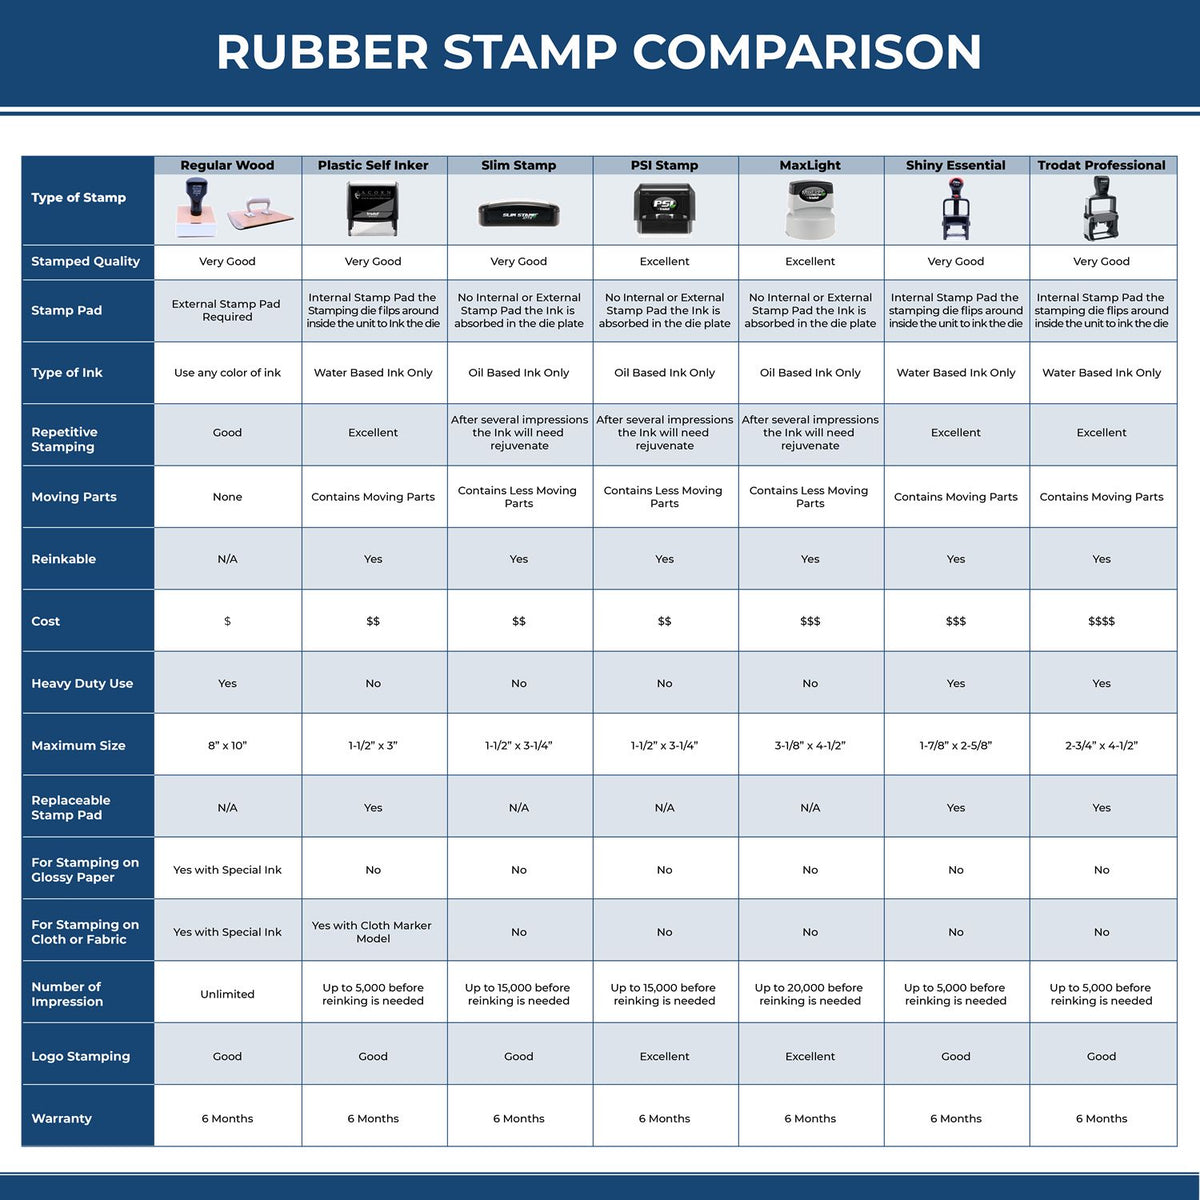 A comparison chart for the different types of mount models available for the North Carolina Professional Engineer Seal Stamp.